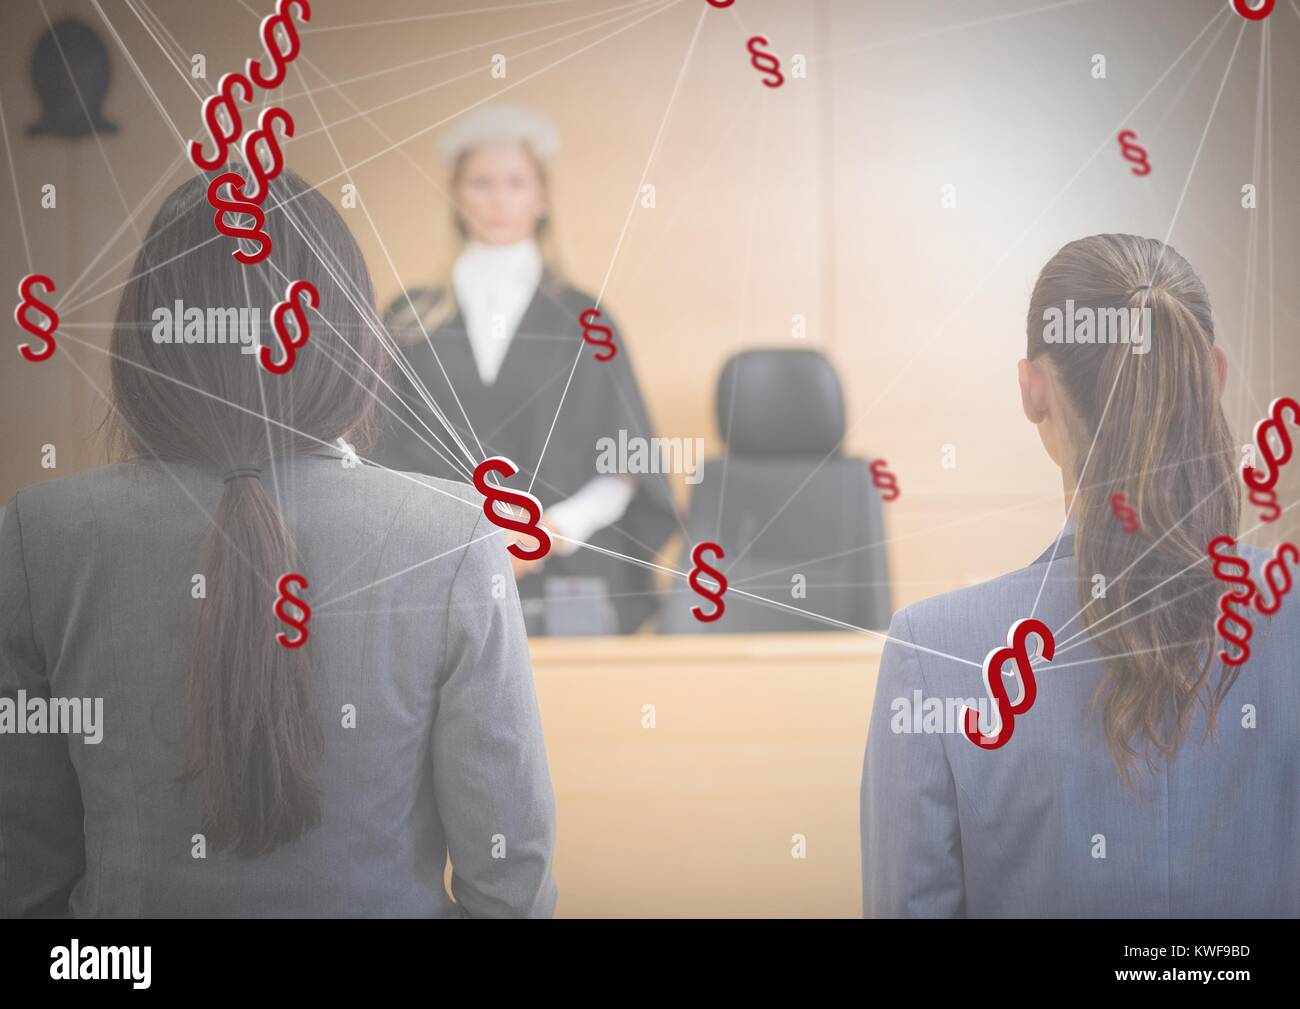 3D Section symbol icons and courtroom Stock Photo